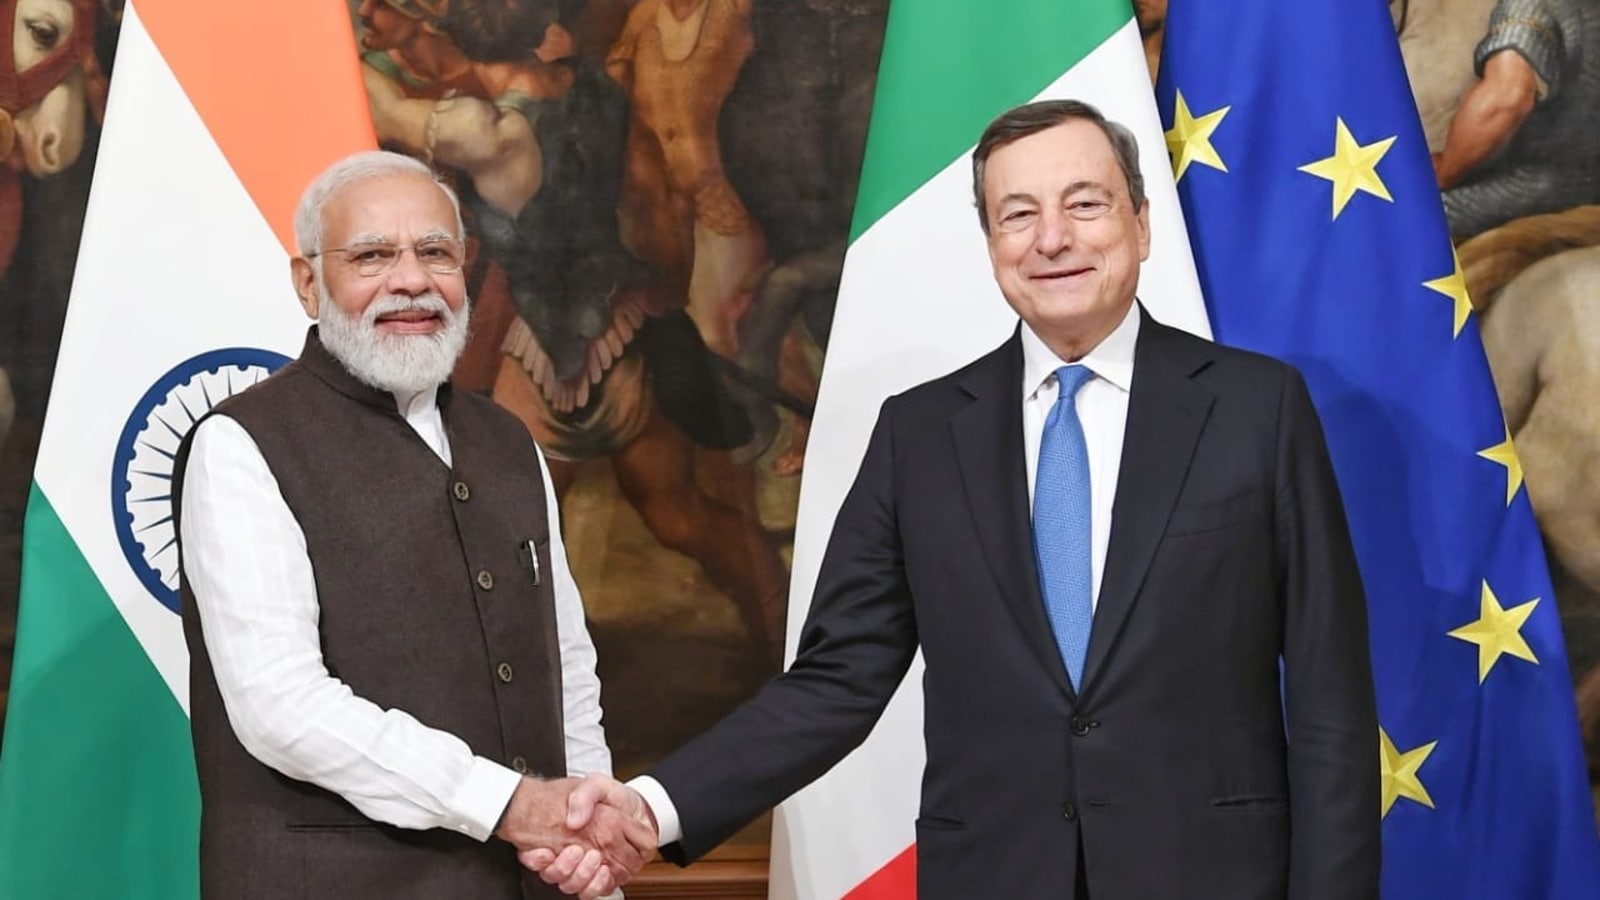 PM Modi, Draghi hold talks on ‘diversifying’ India-Italy ties on sidelines of G20 Summit | Latest News India